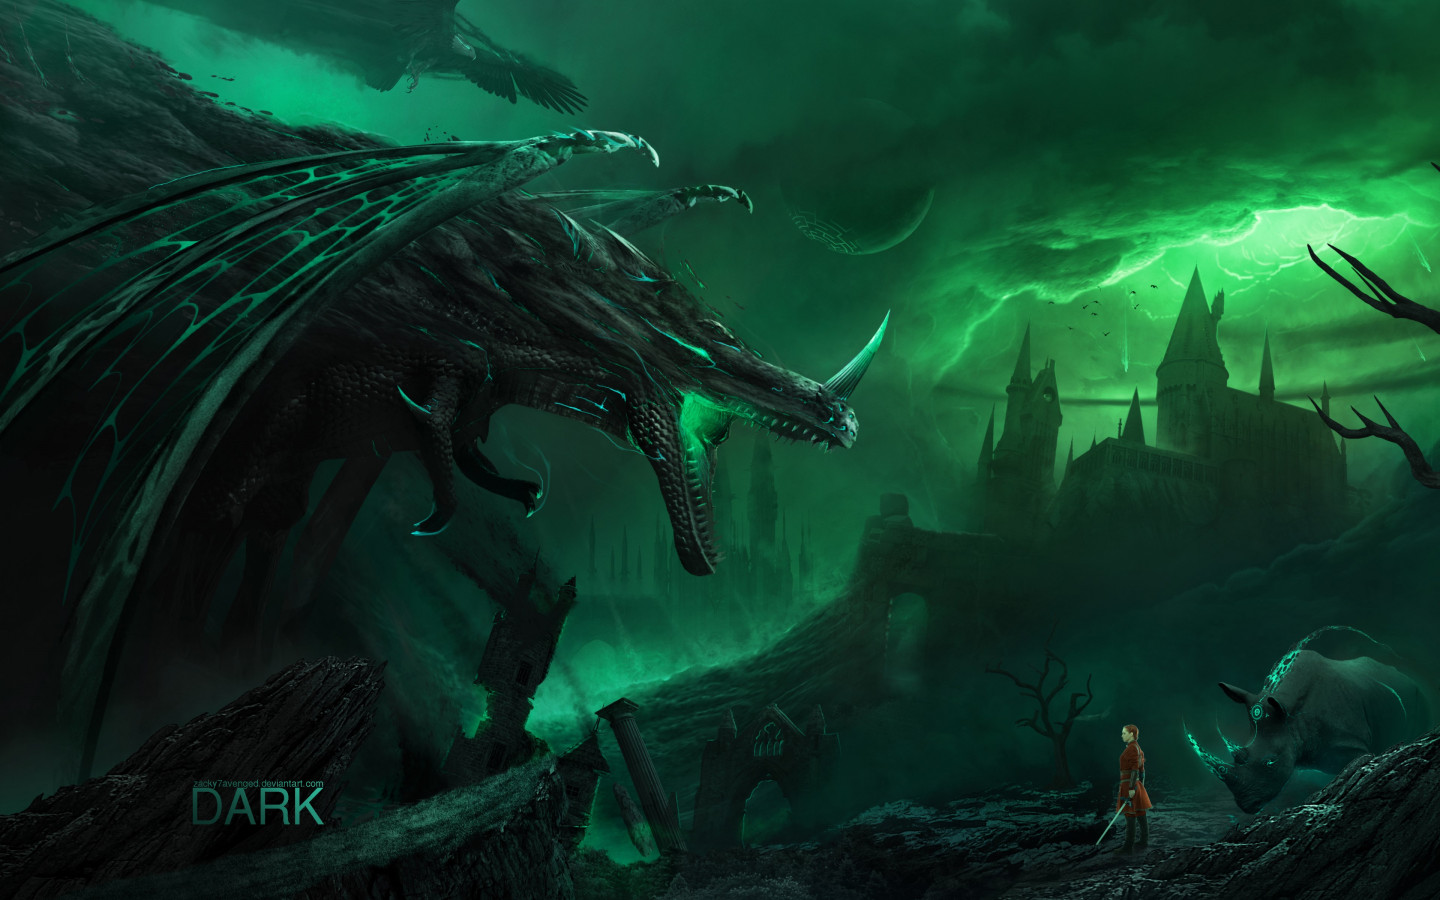 The dark creatures are coming wallpaper 1440x900